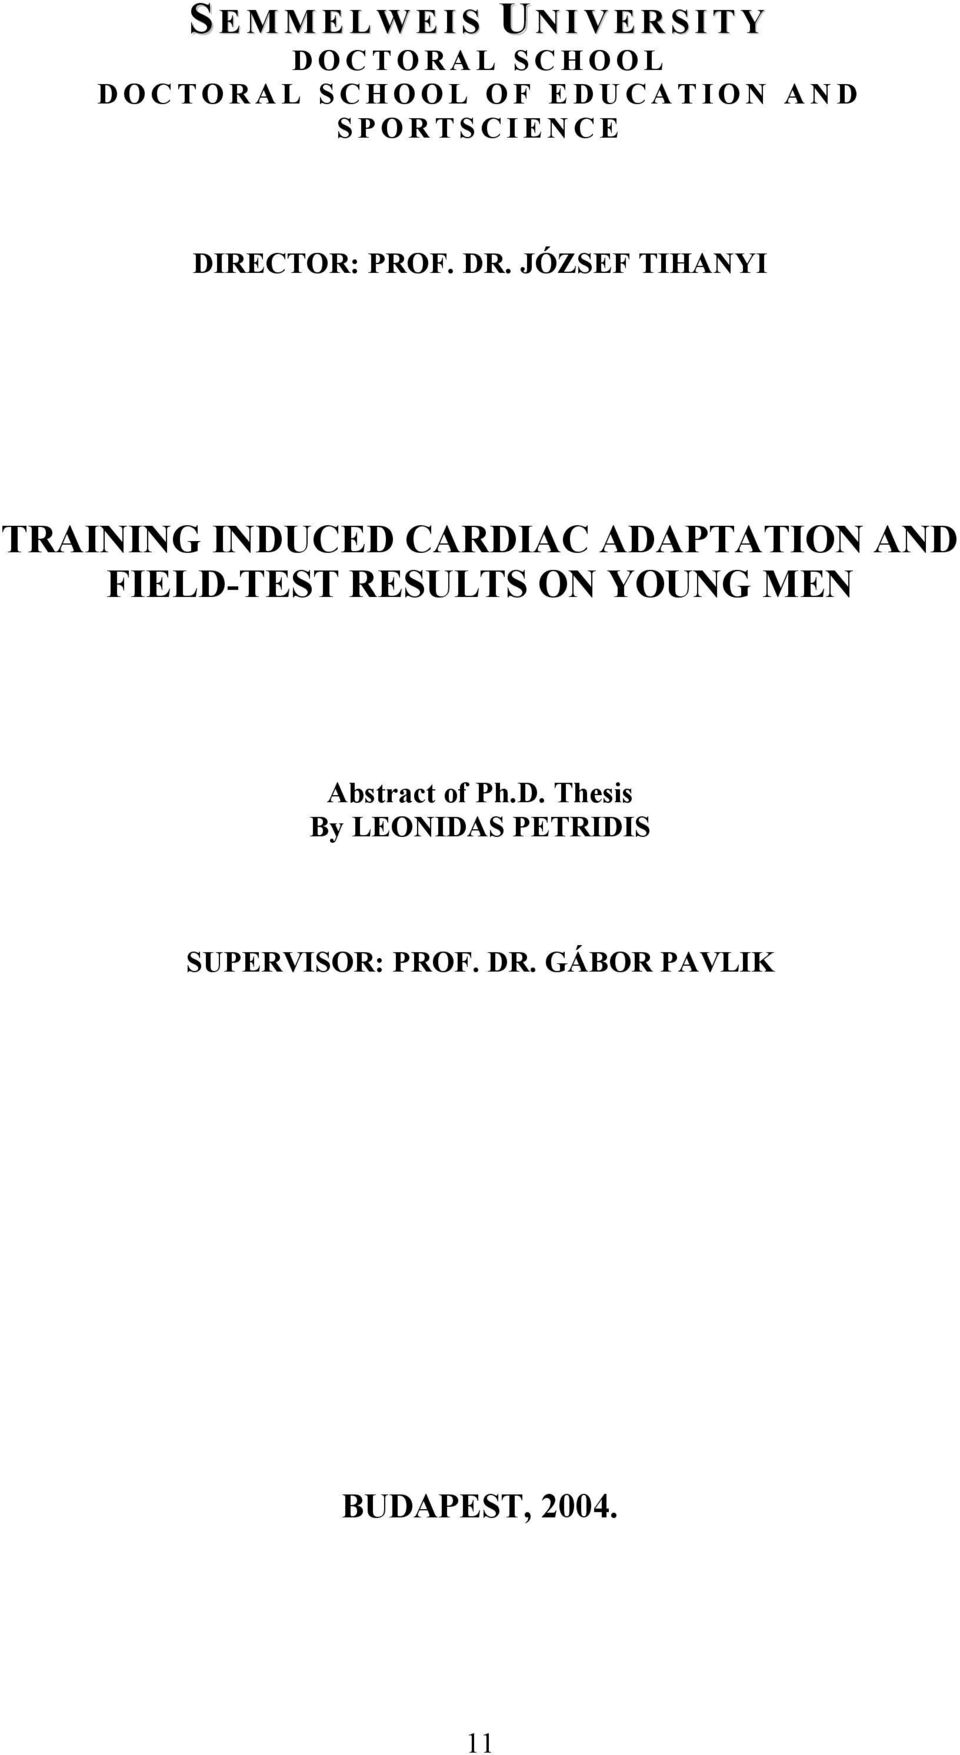 JÓZSEF TIHANYI TRAINING INDUCED CARDIAC ADAPTATION AND FIELD-TEST RESULTS ON